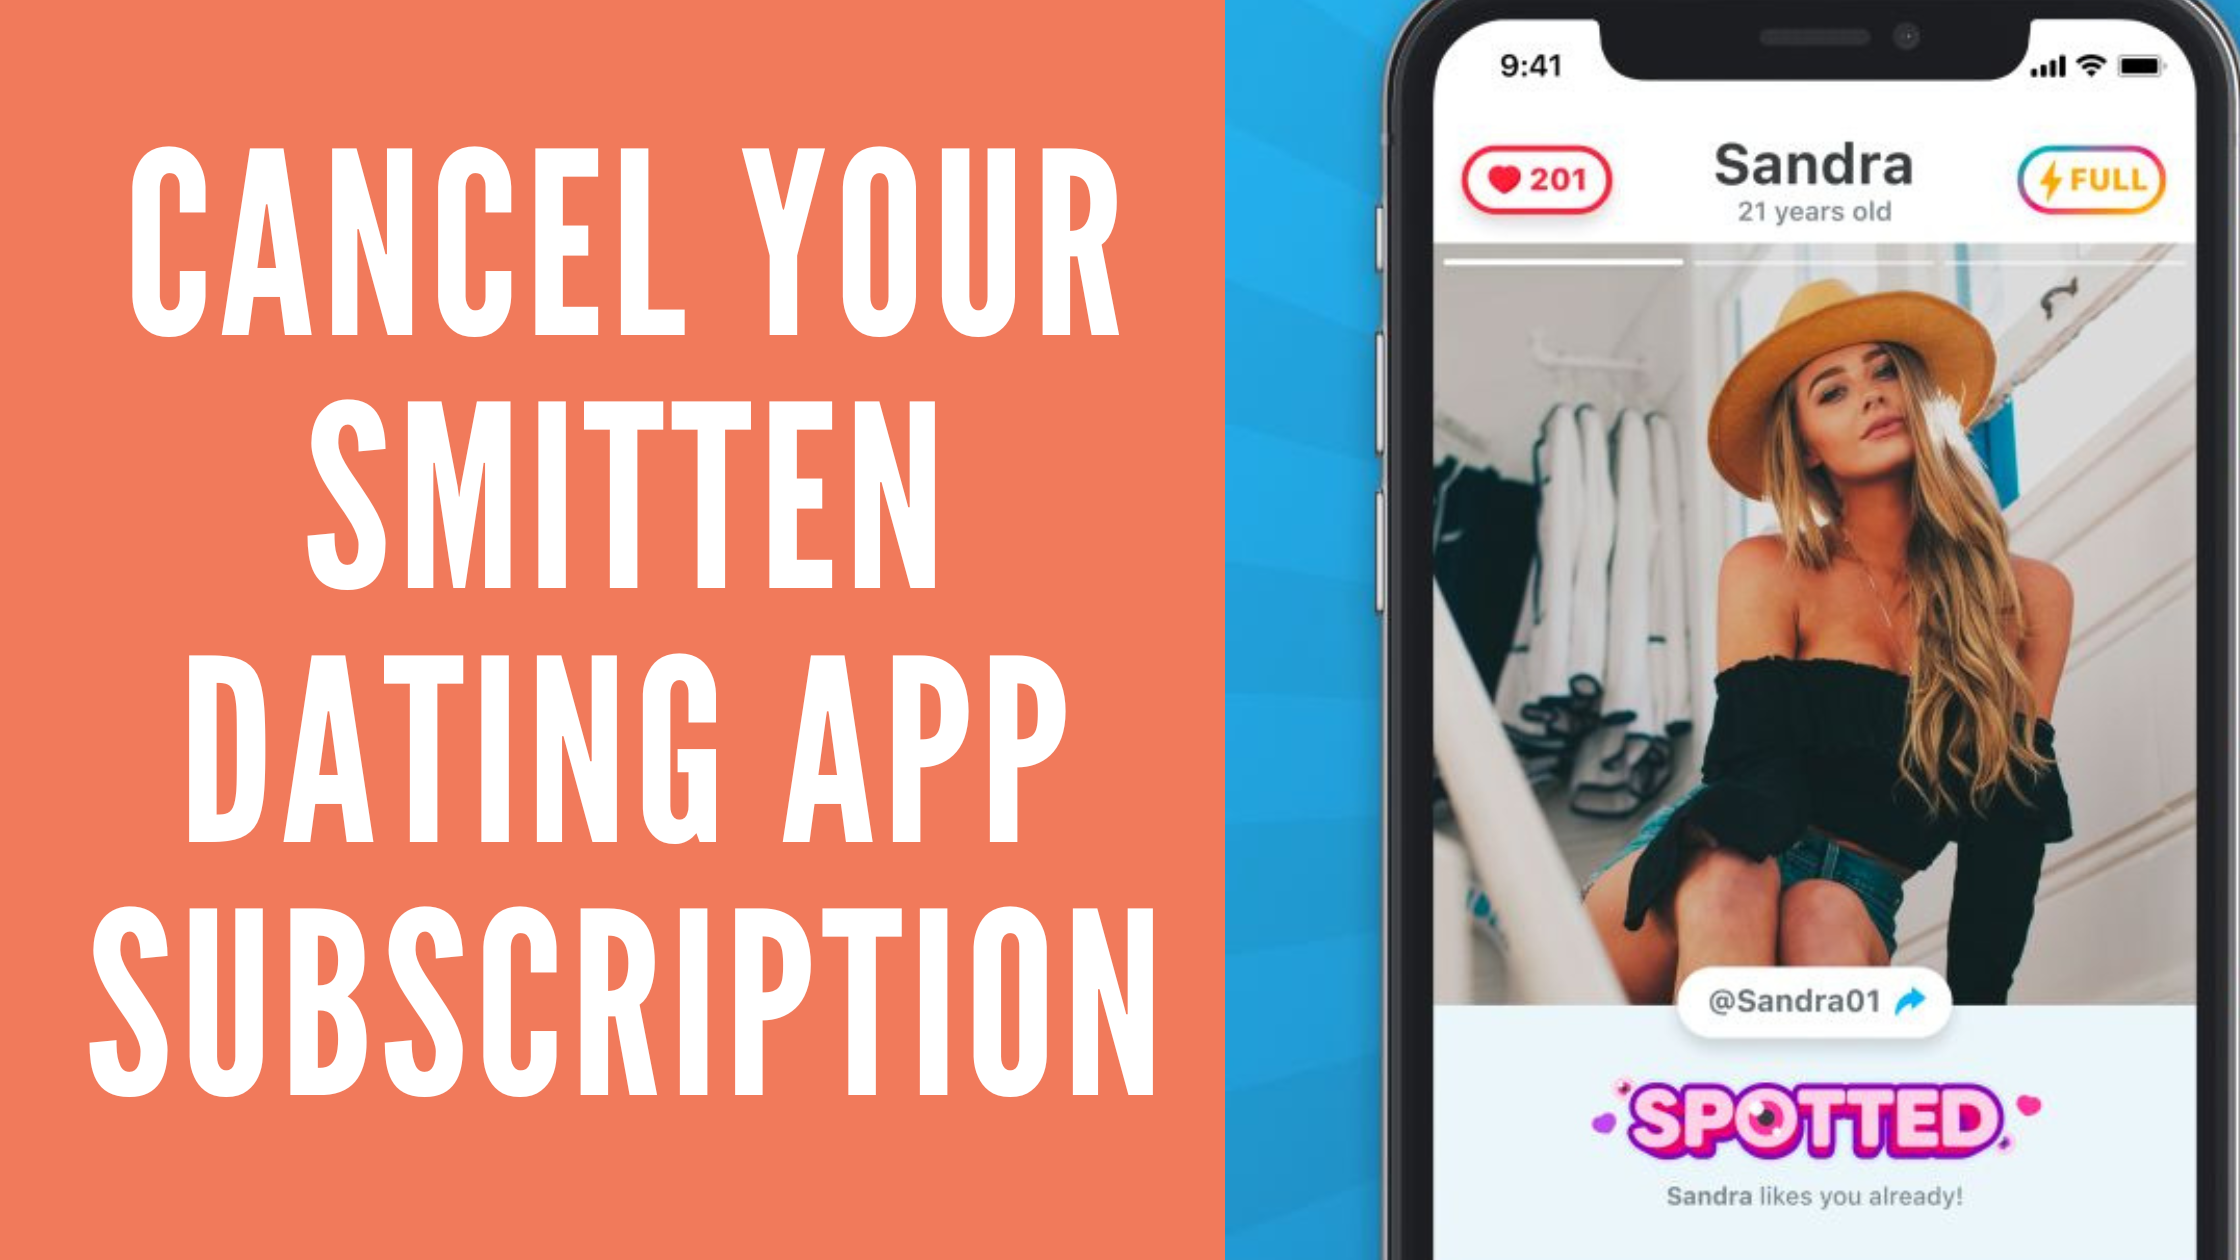 How Do You Cancel Your Smitten Dating App Subscription?